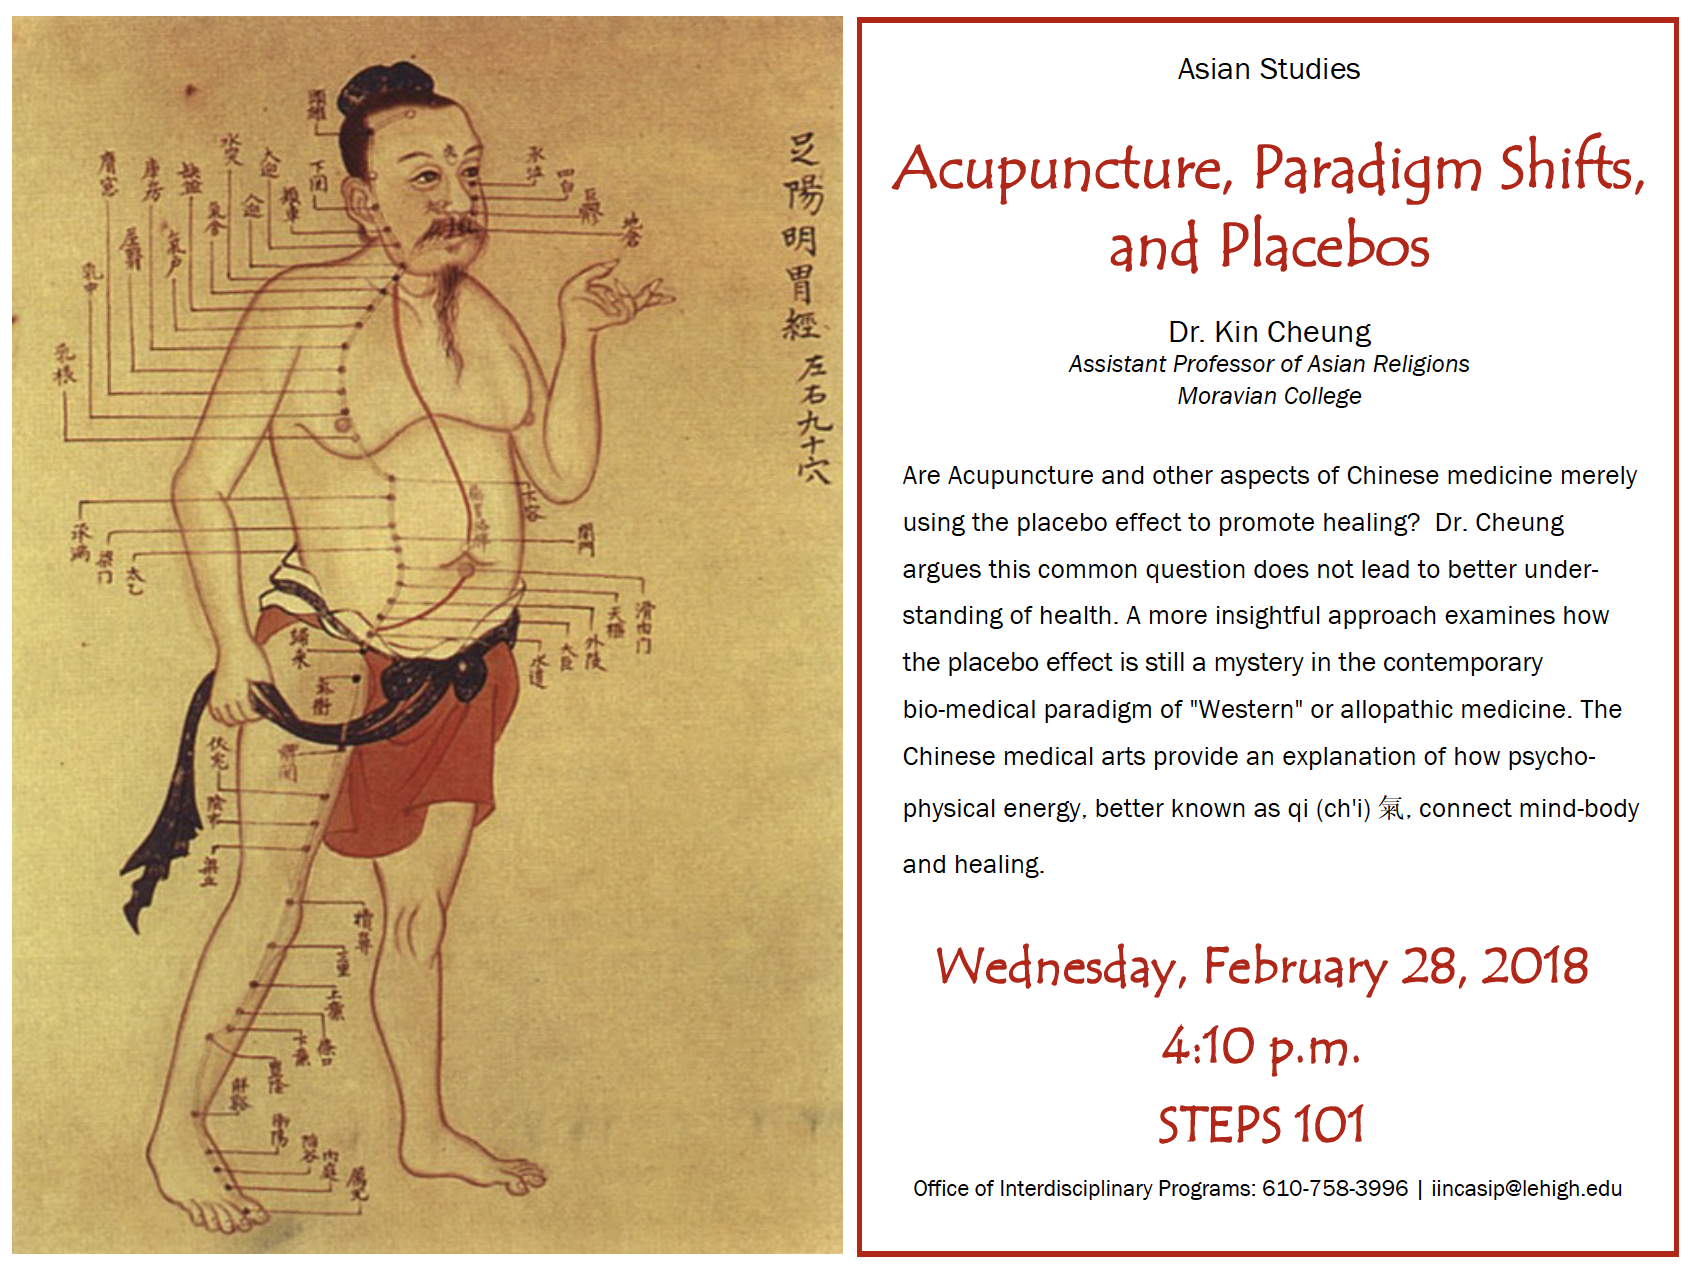 Acupuncture, Paradigm, Shifts and Placebos Flyer